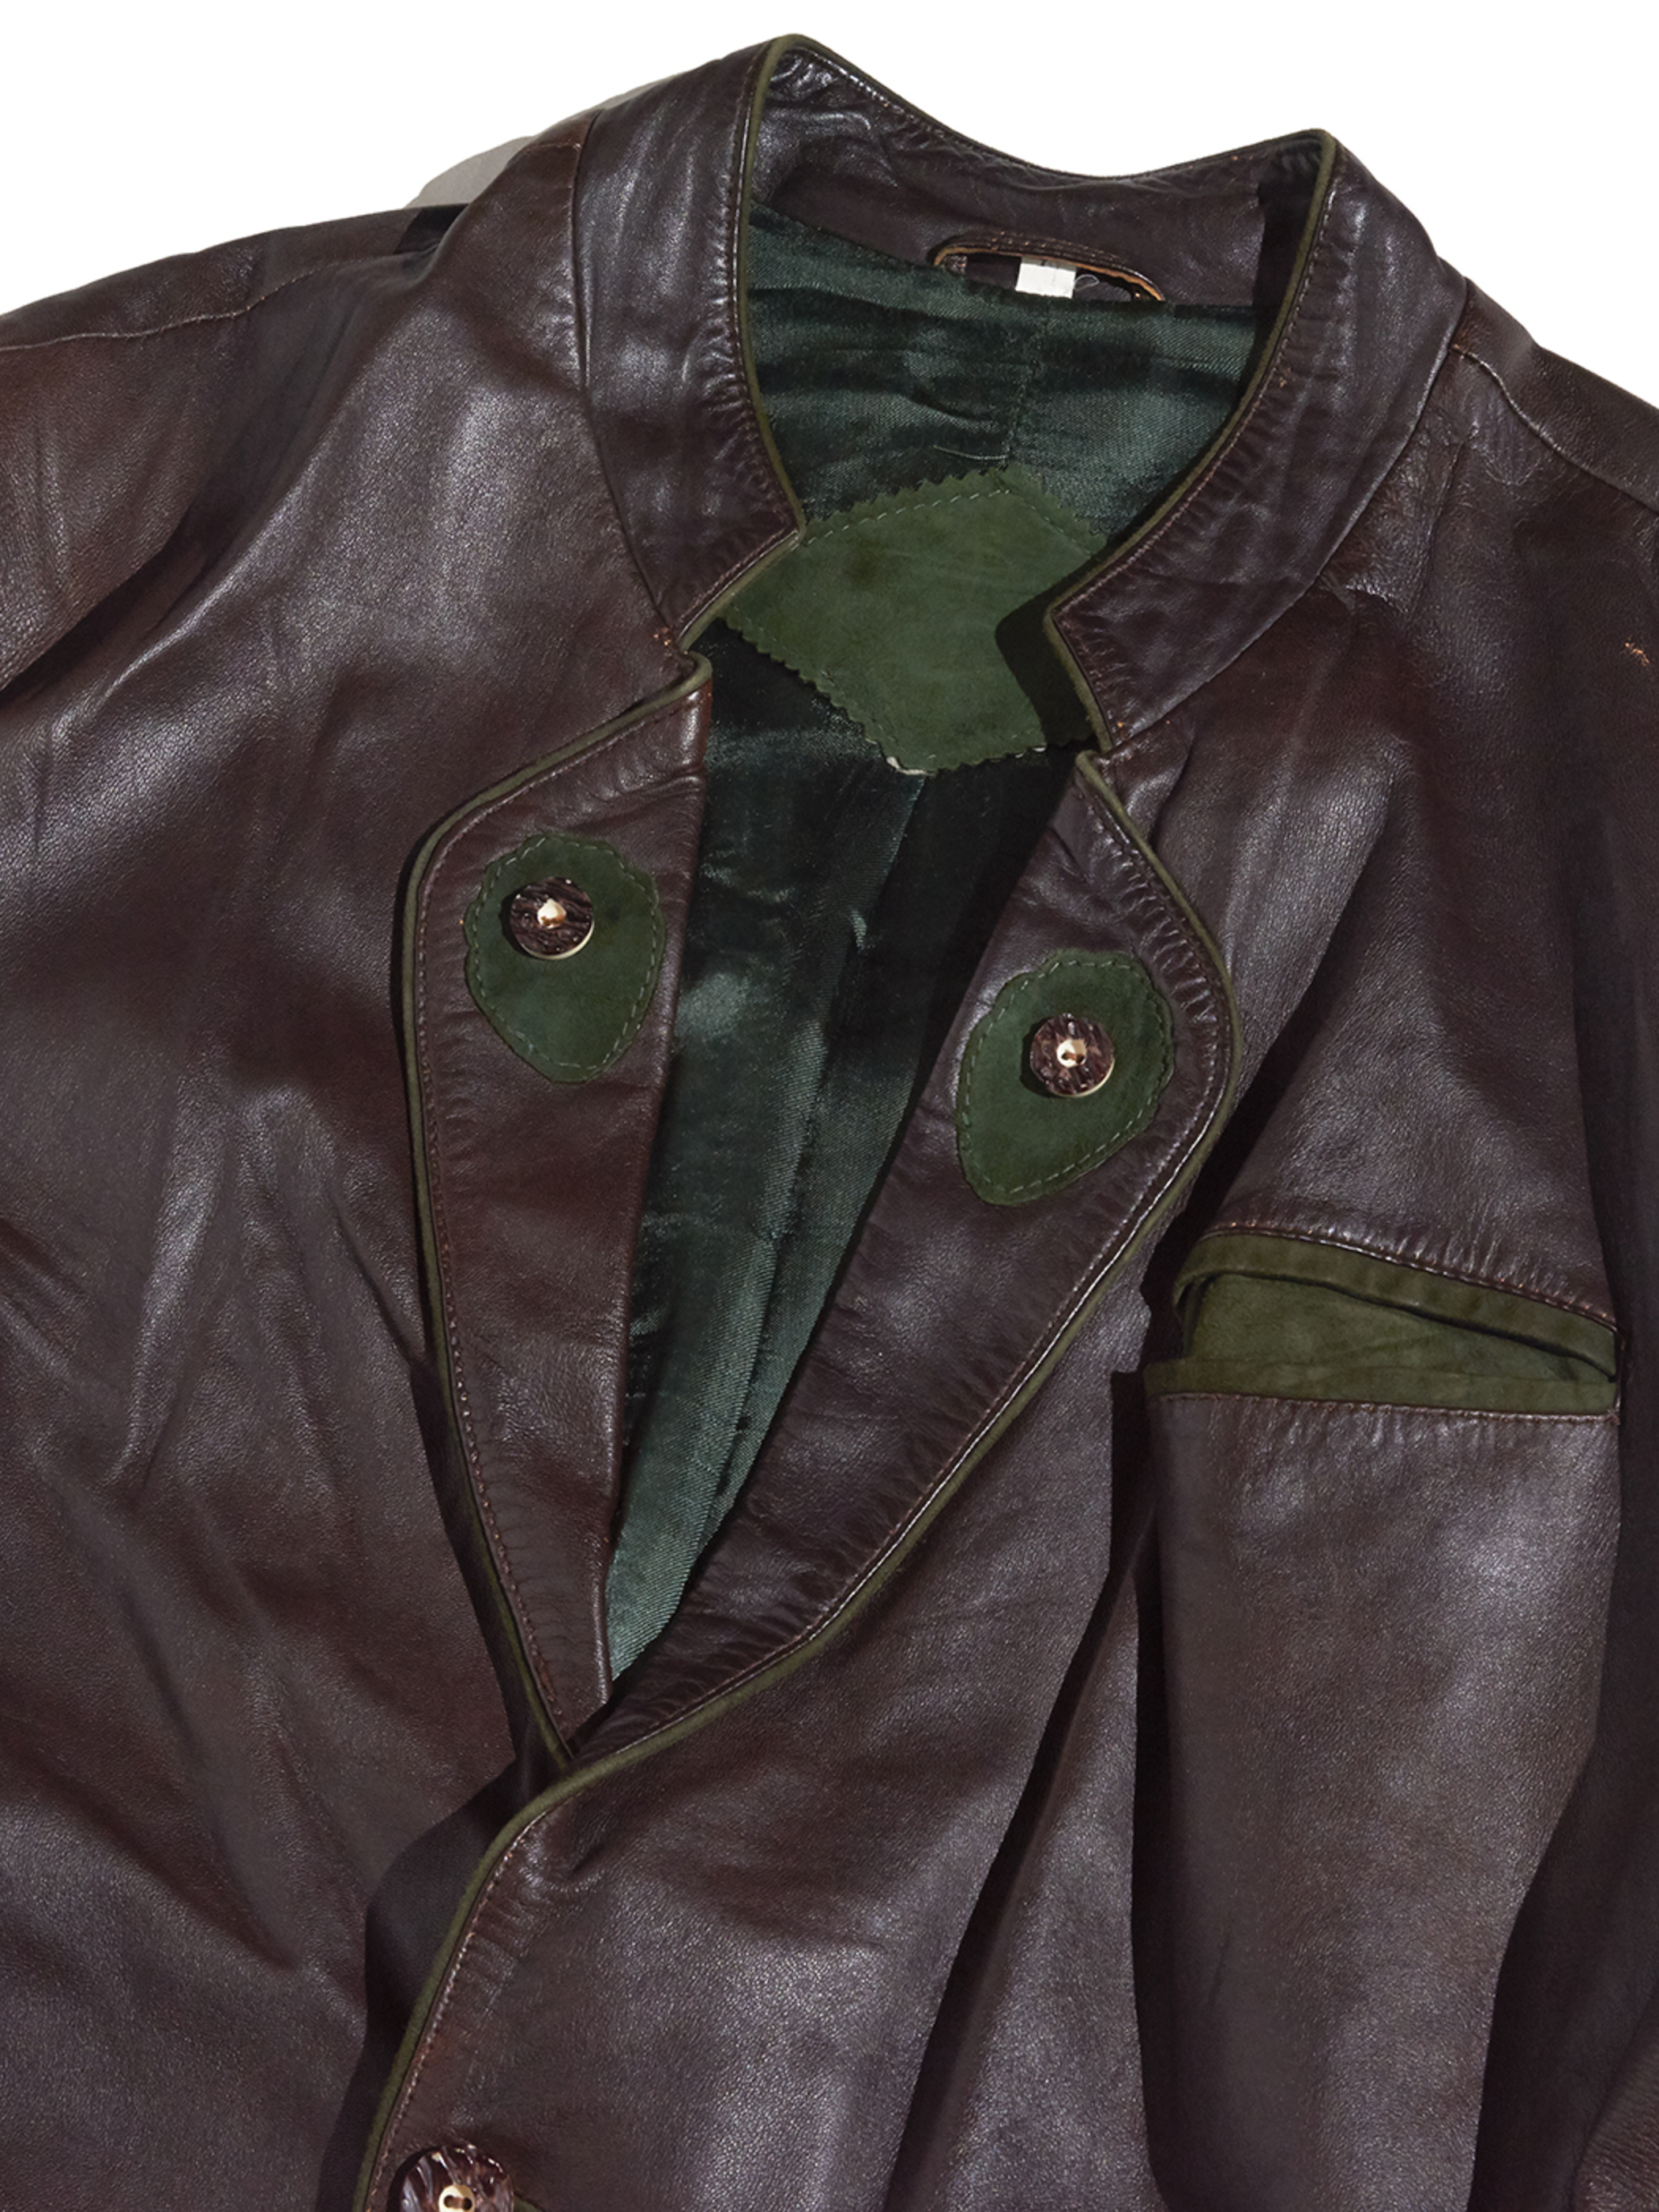 1980s "unknown" tyrolean style smooth leather jacket -DARK BROWN-